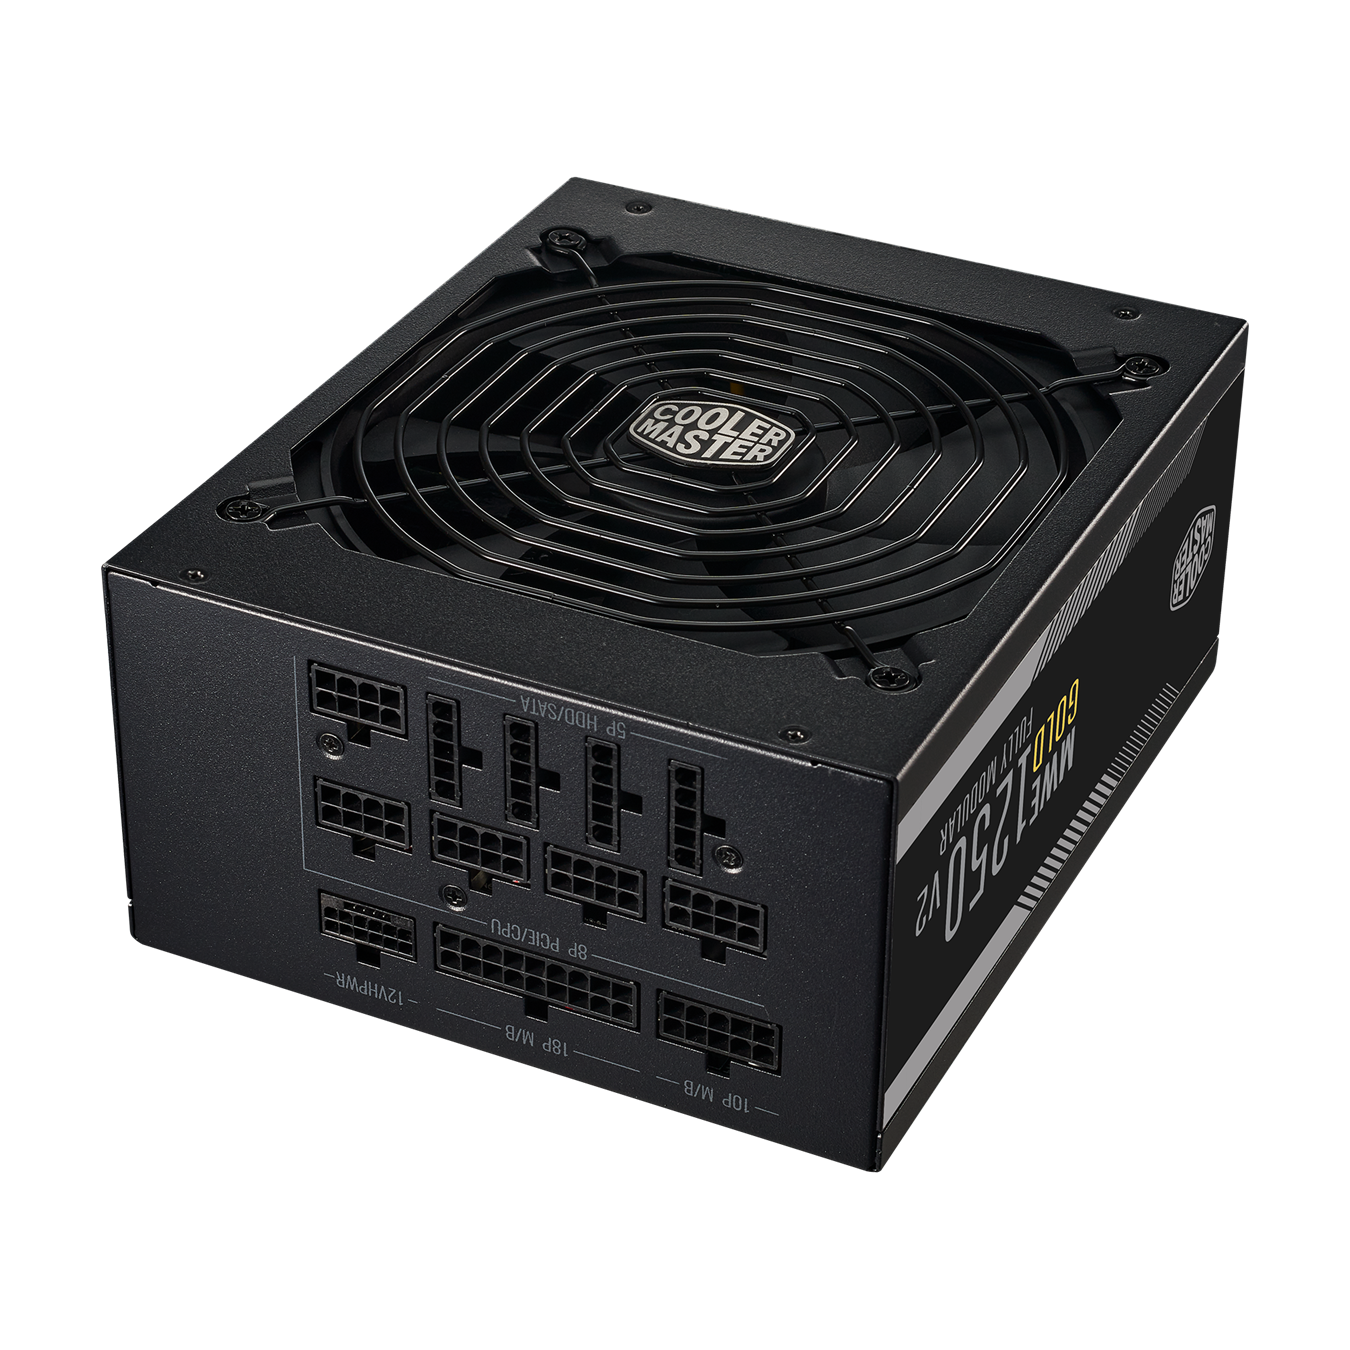 MWE Gold 1250 comes with full modular flat, black cables for increased airflow.